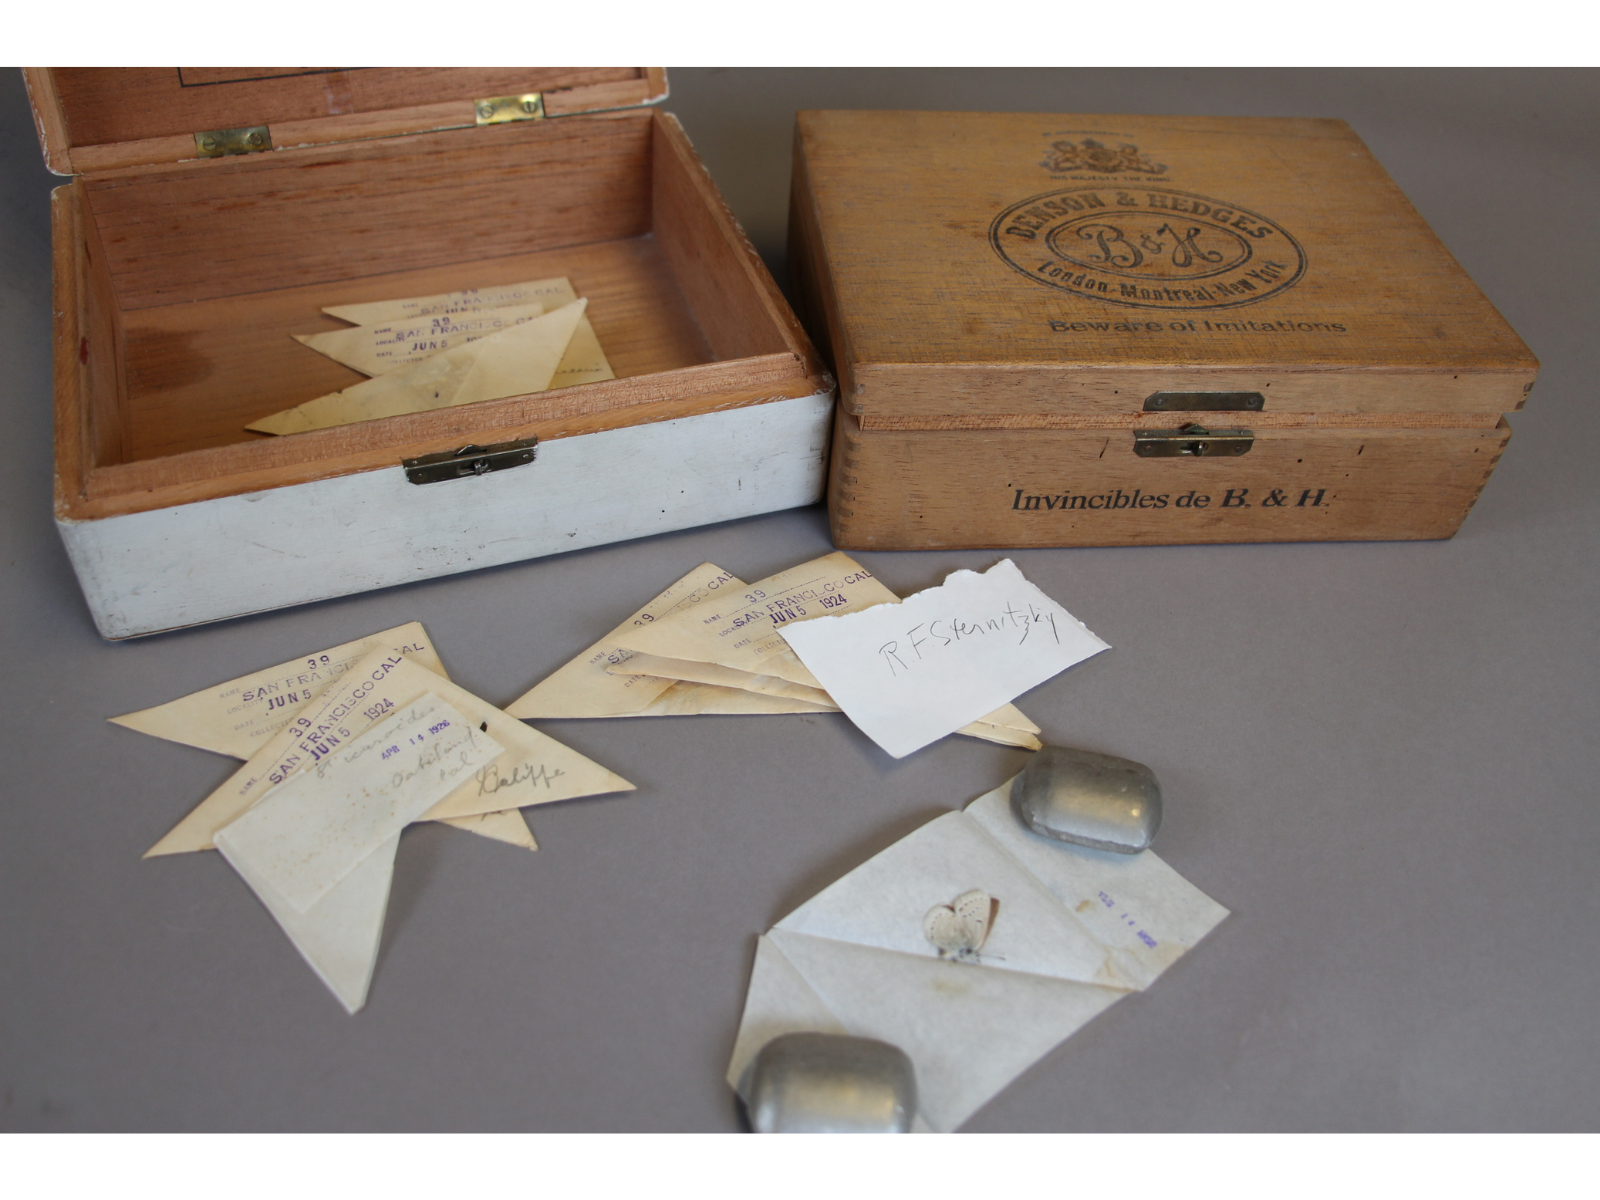 Two wooden boxes, one of which has the hinged lid open, with triangle folded papers inside and in front of the box. One of the papers is unfolded, and held open by paperweights, revealing a preserved butterfly specimen inside.